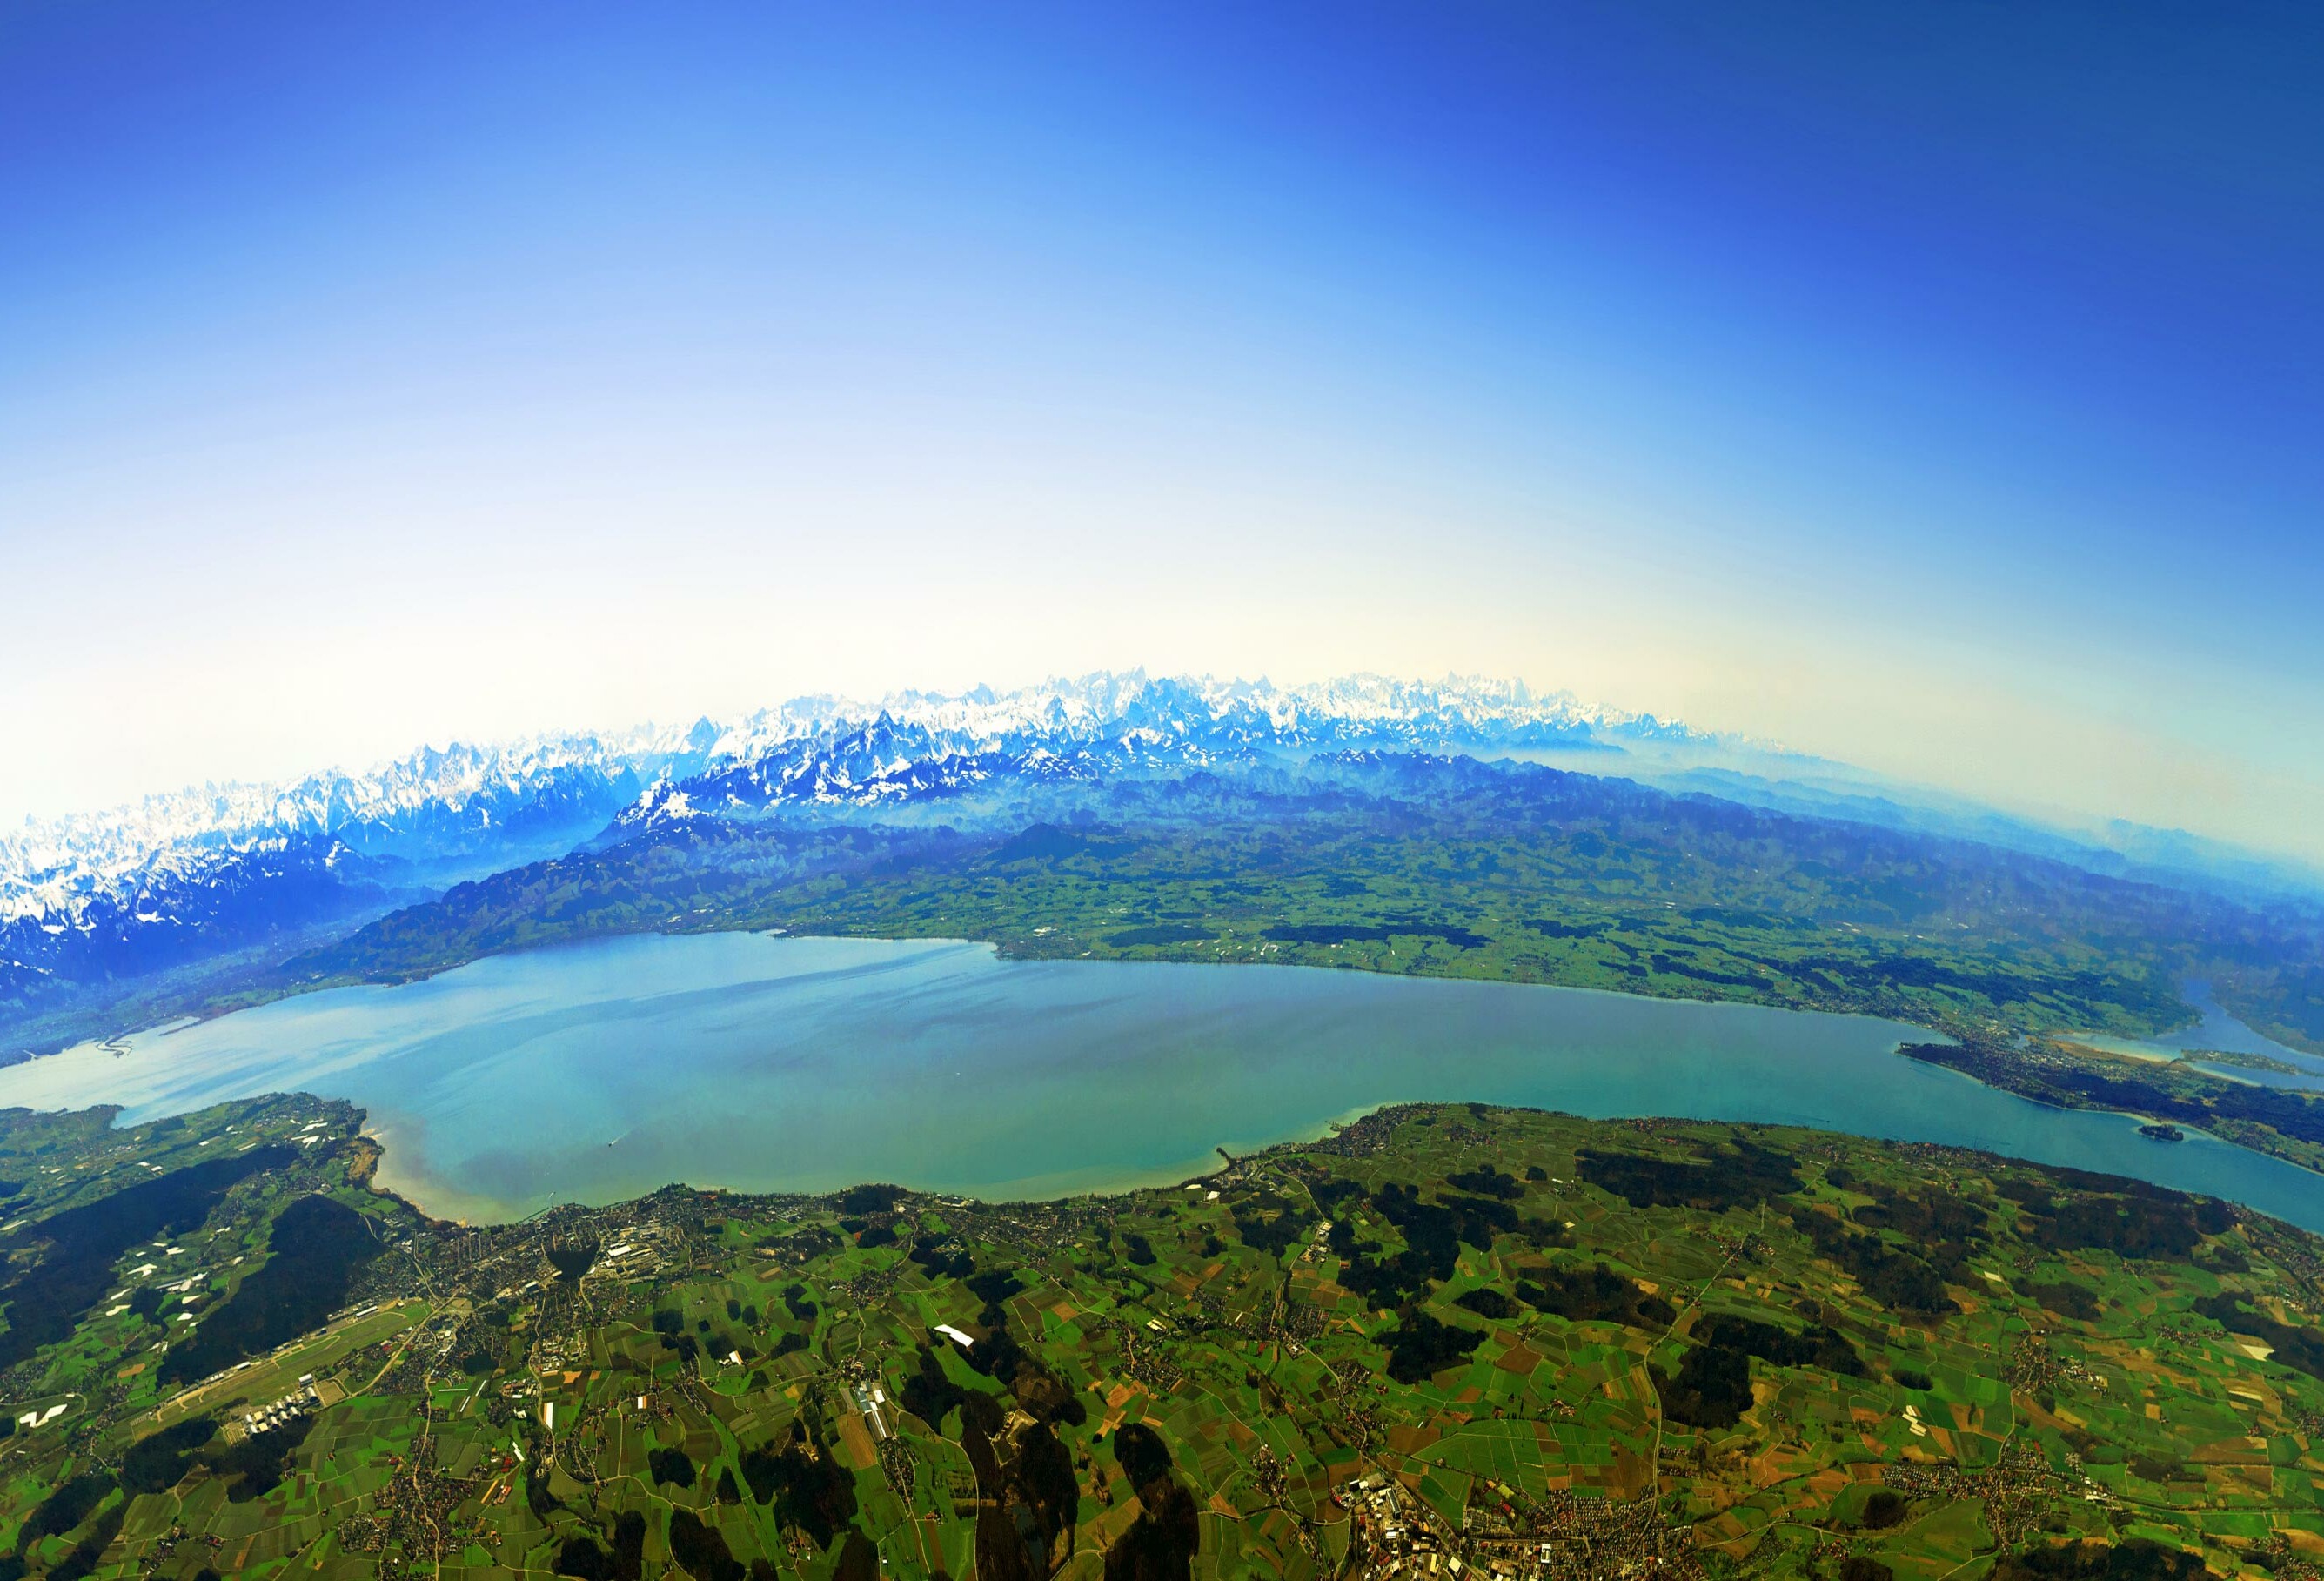 Aerial view of Lake Constance